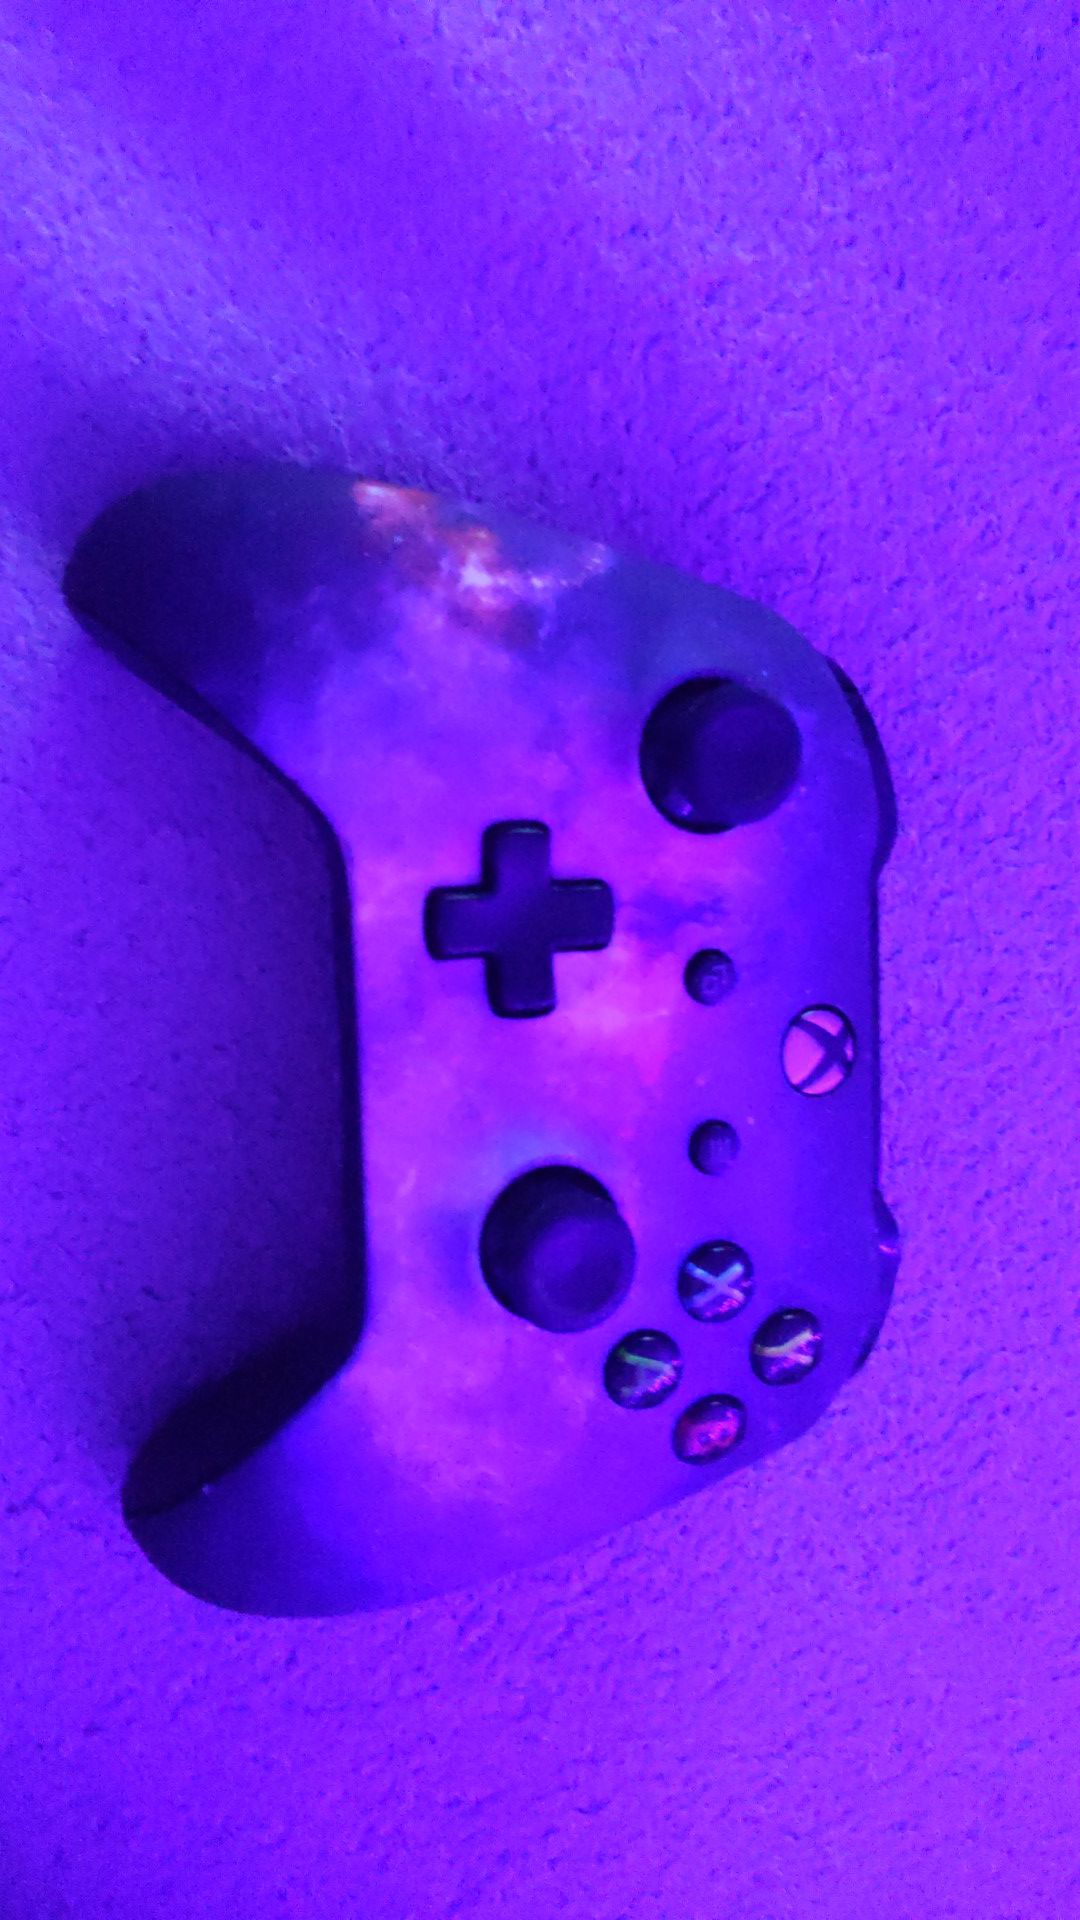 Xbox one controller custom made with modded features, following with a Xbox one head set.